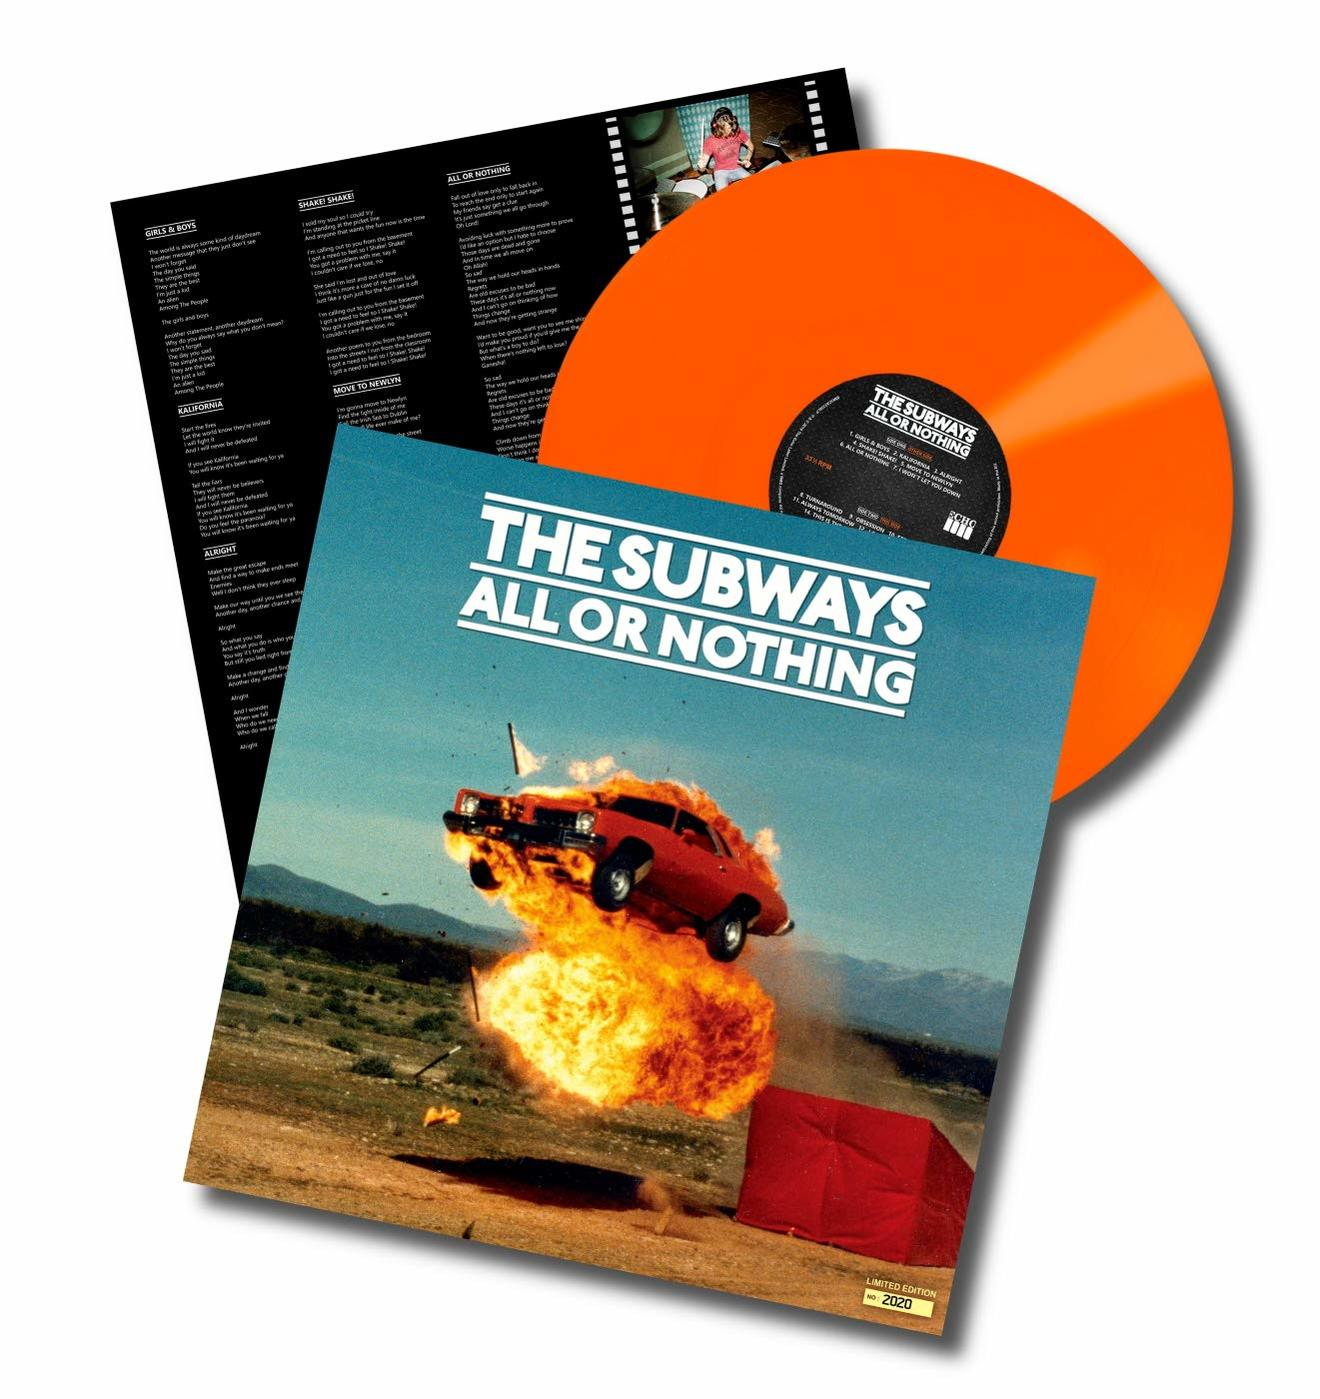 NOTHING (Vinyl) Subways The - (ANNIVERSARY OR - EDITION) ALL